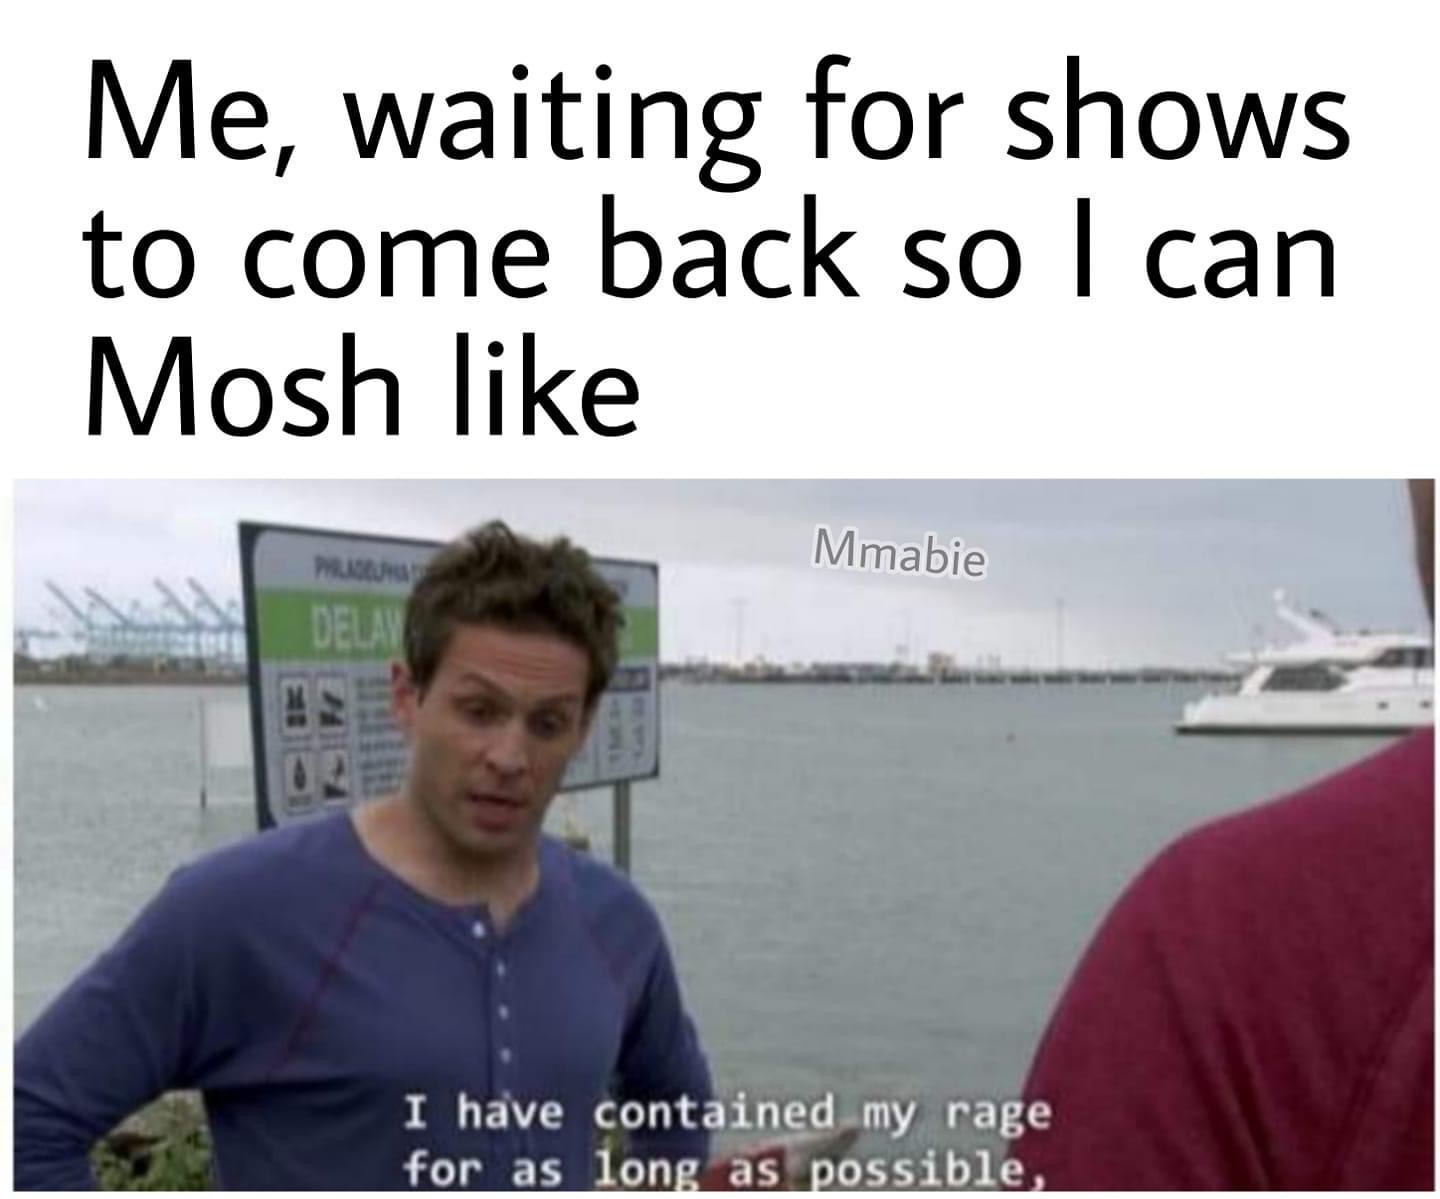 it's always sunny aquatic vehicle - Me, waiting for shows to come back so I can Mosh Mmabie Mus Delay I have contained my rage for as long as possible,